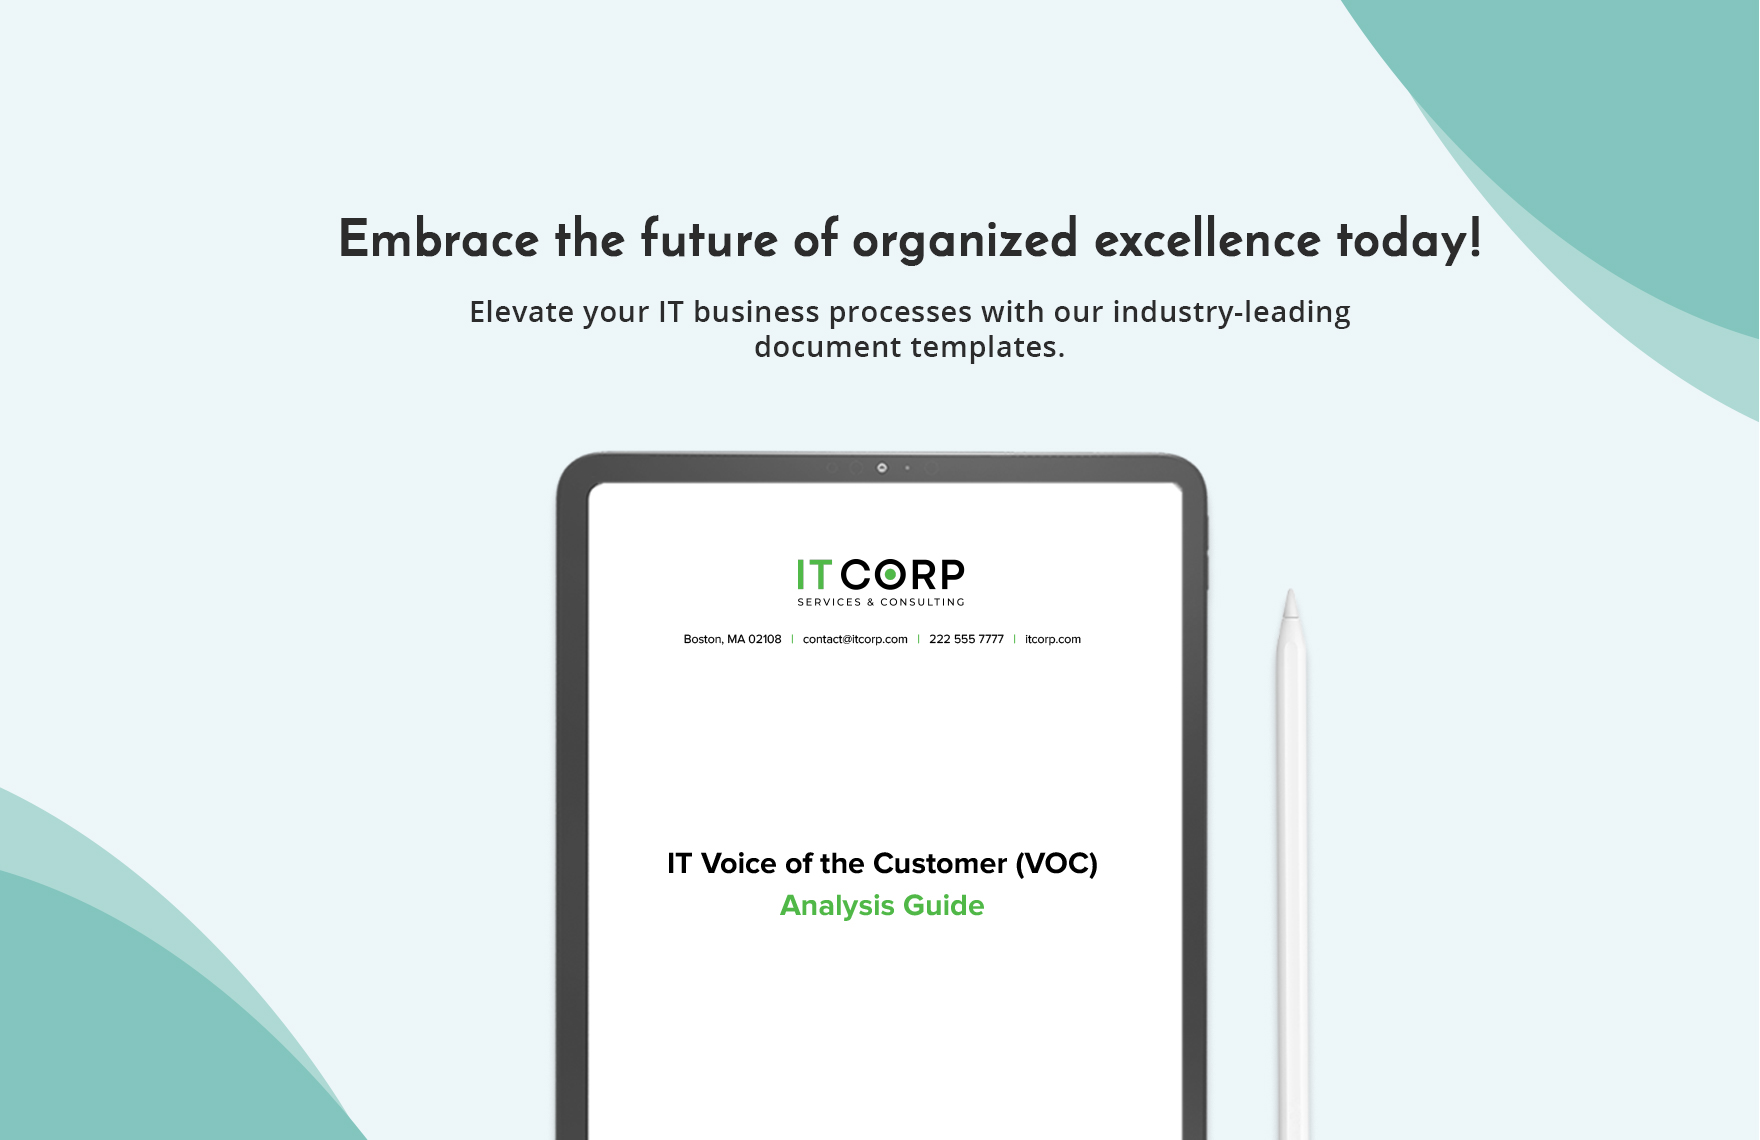 IT Voice of the Customer (VOC) Analysis Guide Template